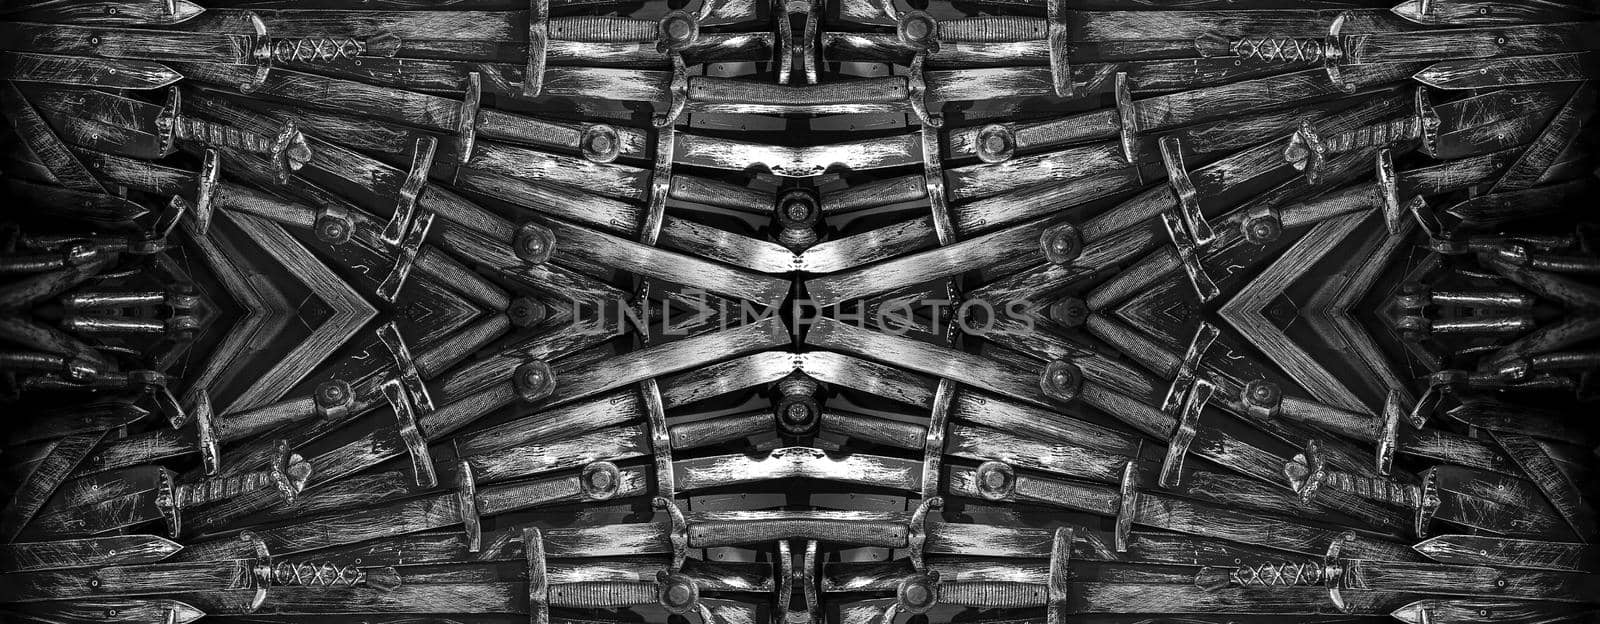 Metal knight swords horizontal background. Close up. The concept Knights. by vikiriki